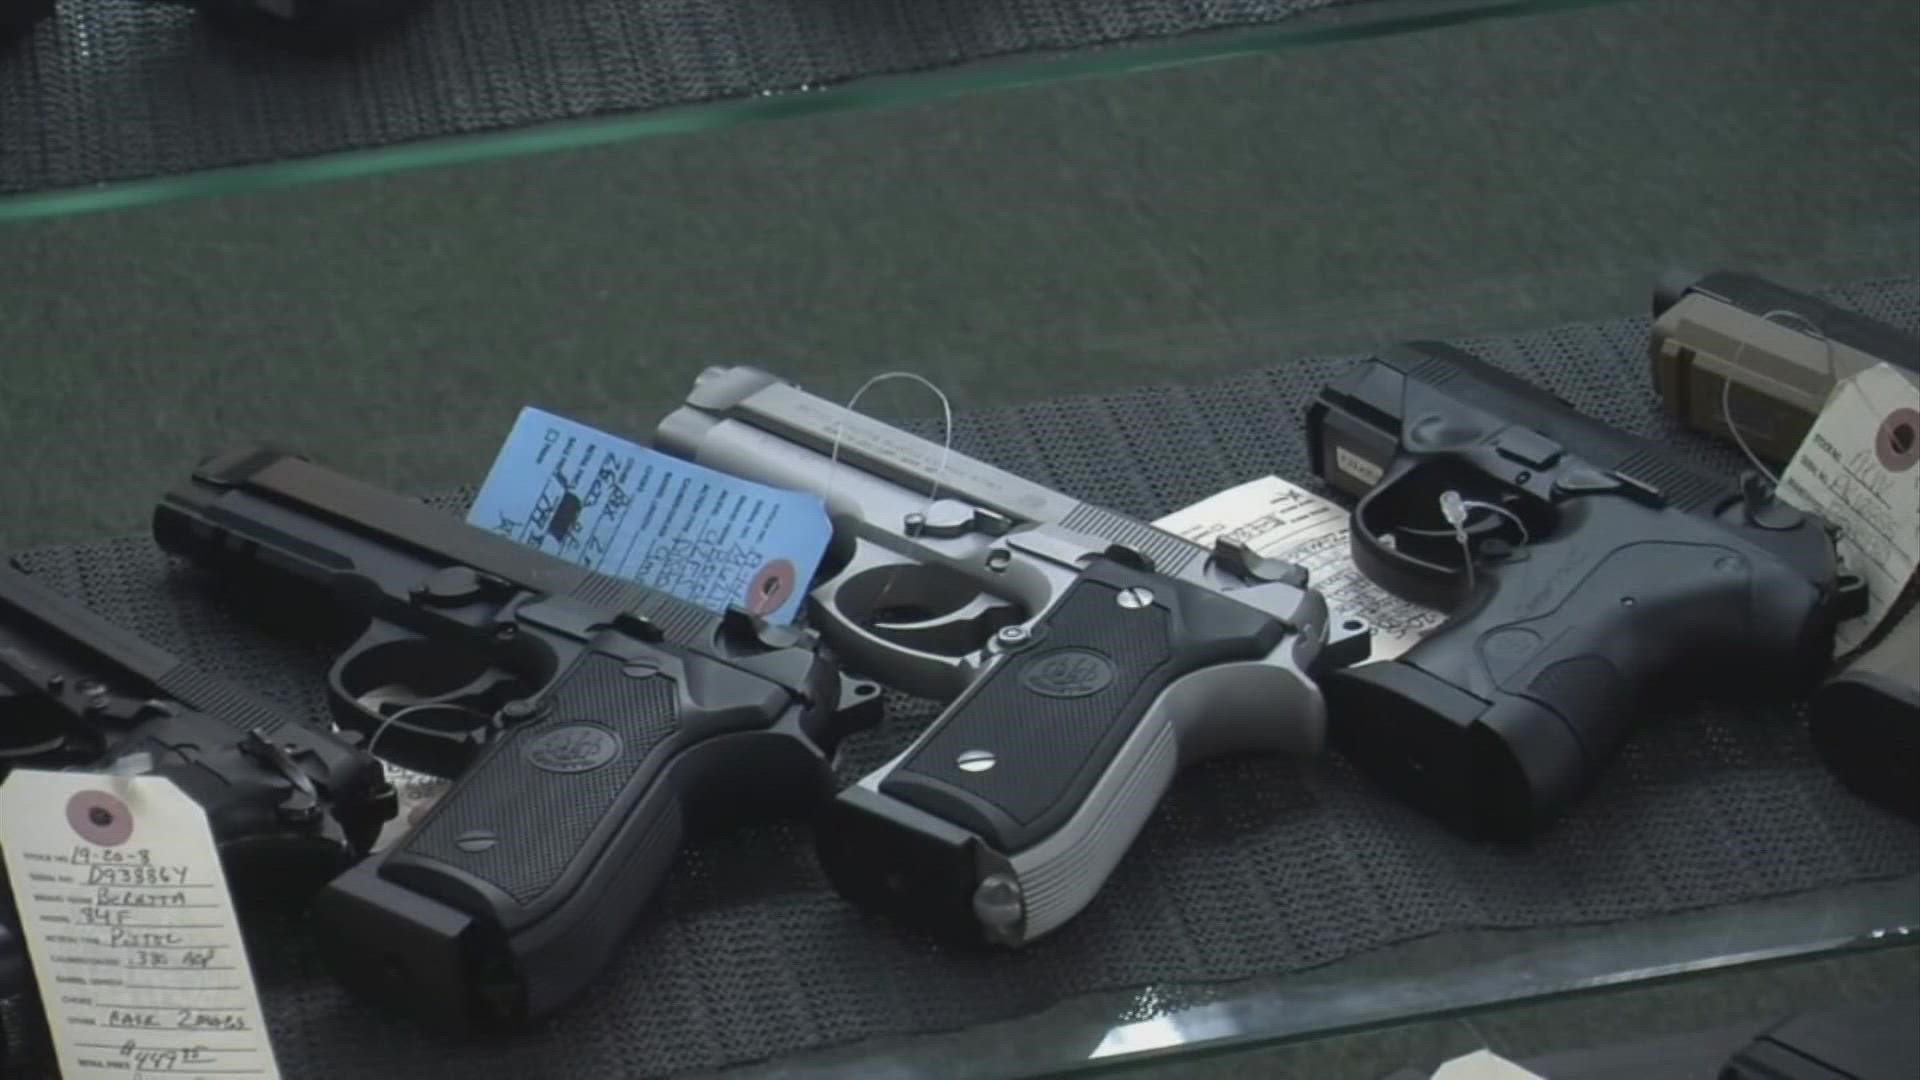 While Regina Fuentes with the Columbus Education is against the bill, Rob Sexton with the Buckeye Firearms Association says it adds an extra layer of security.